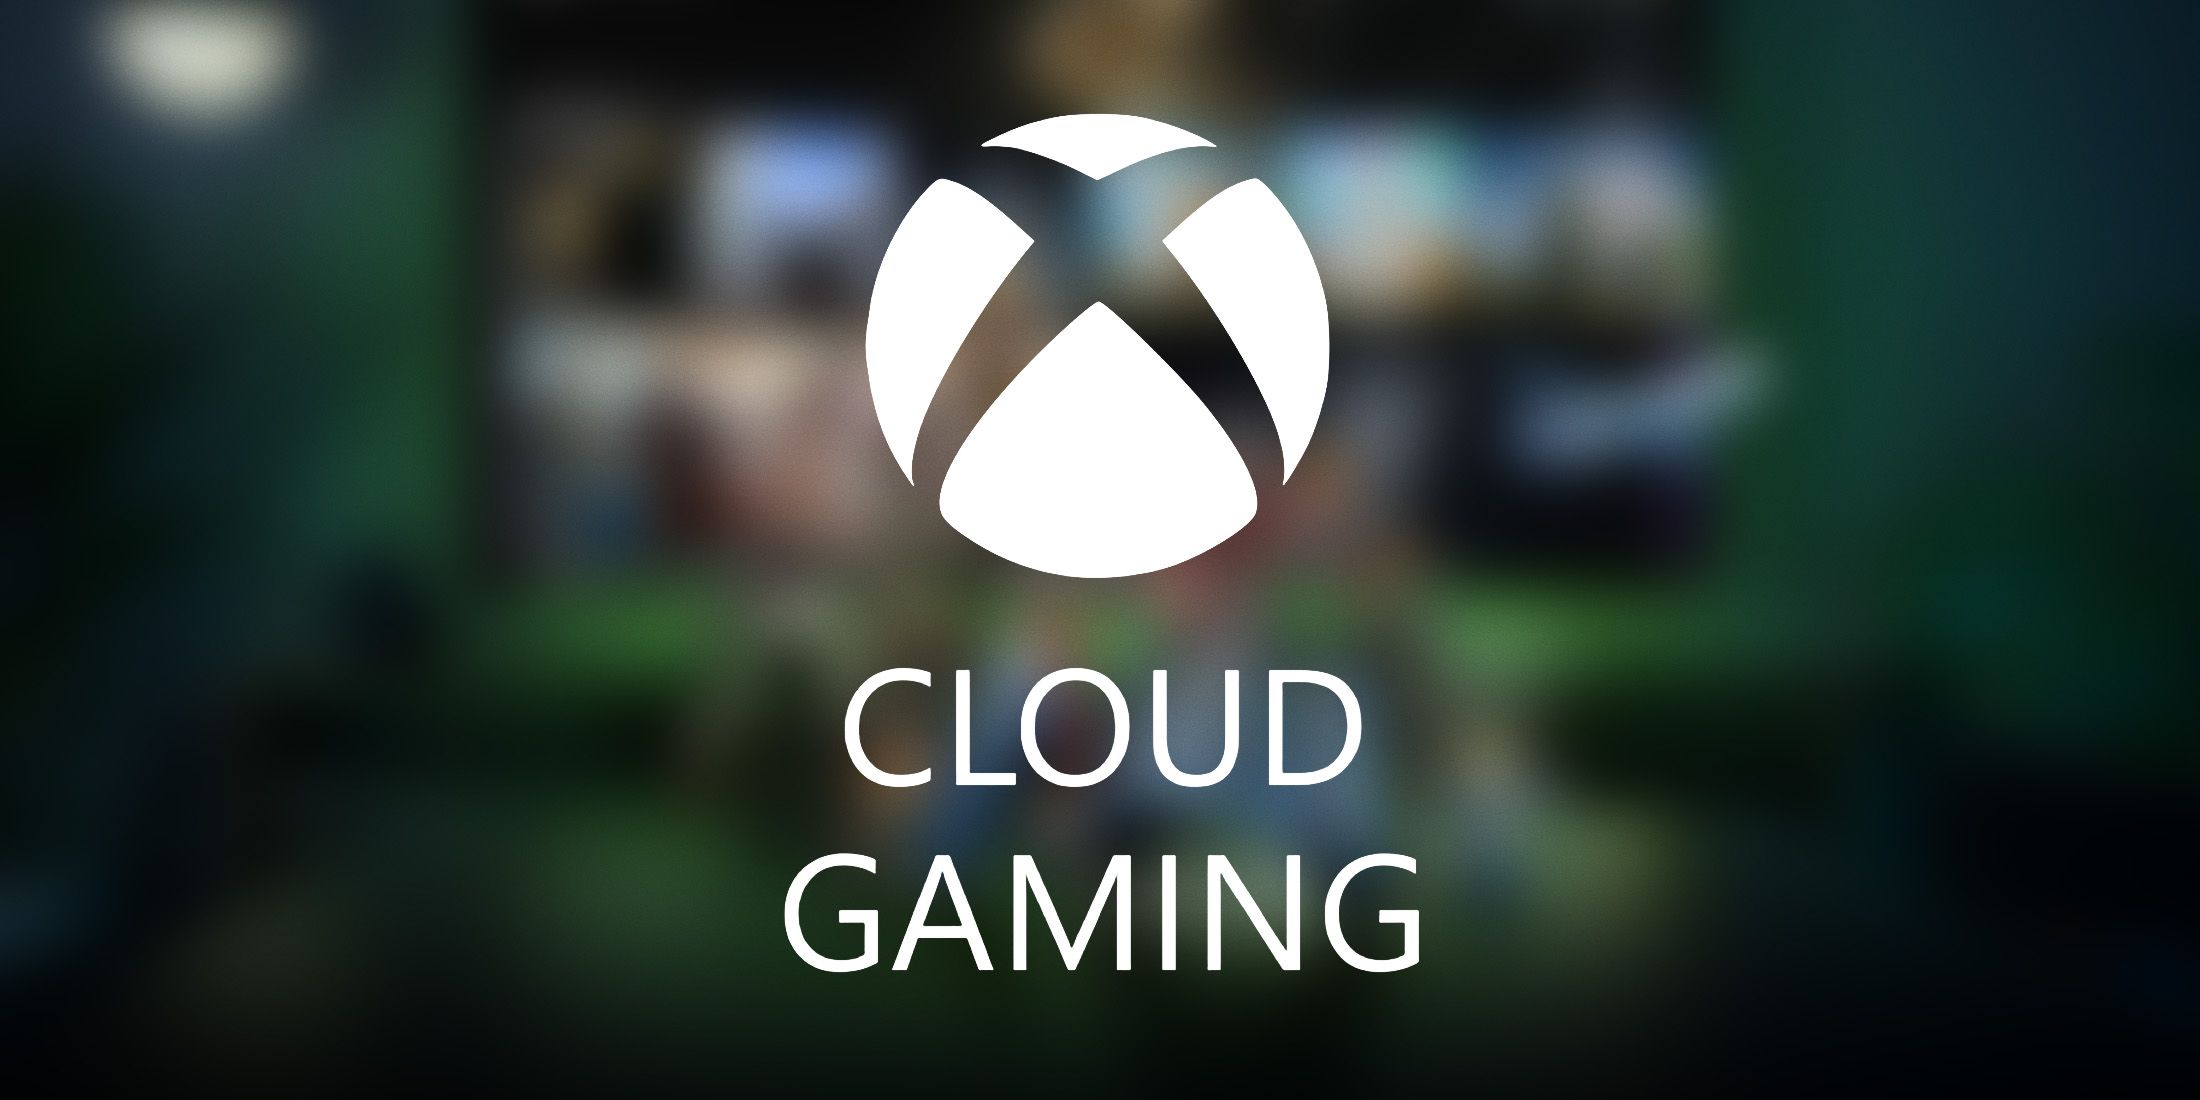 xbox-cloud-gaming-coming-to-another-platform-amazon-fire-game-rant